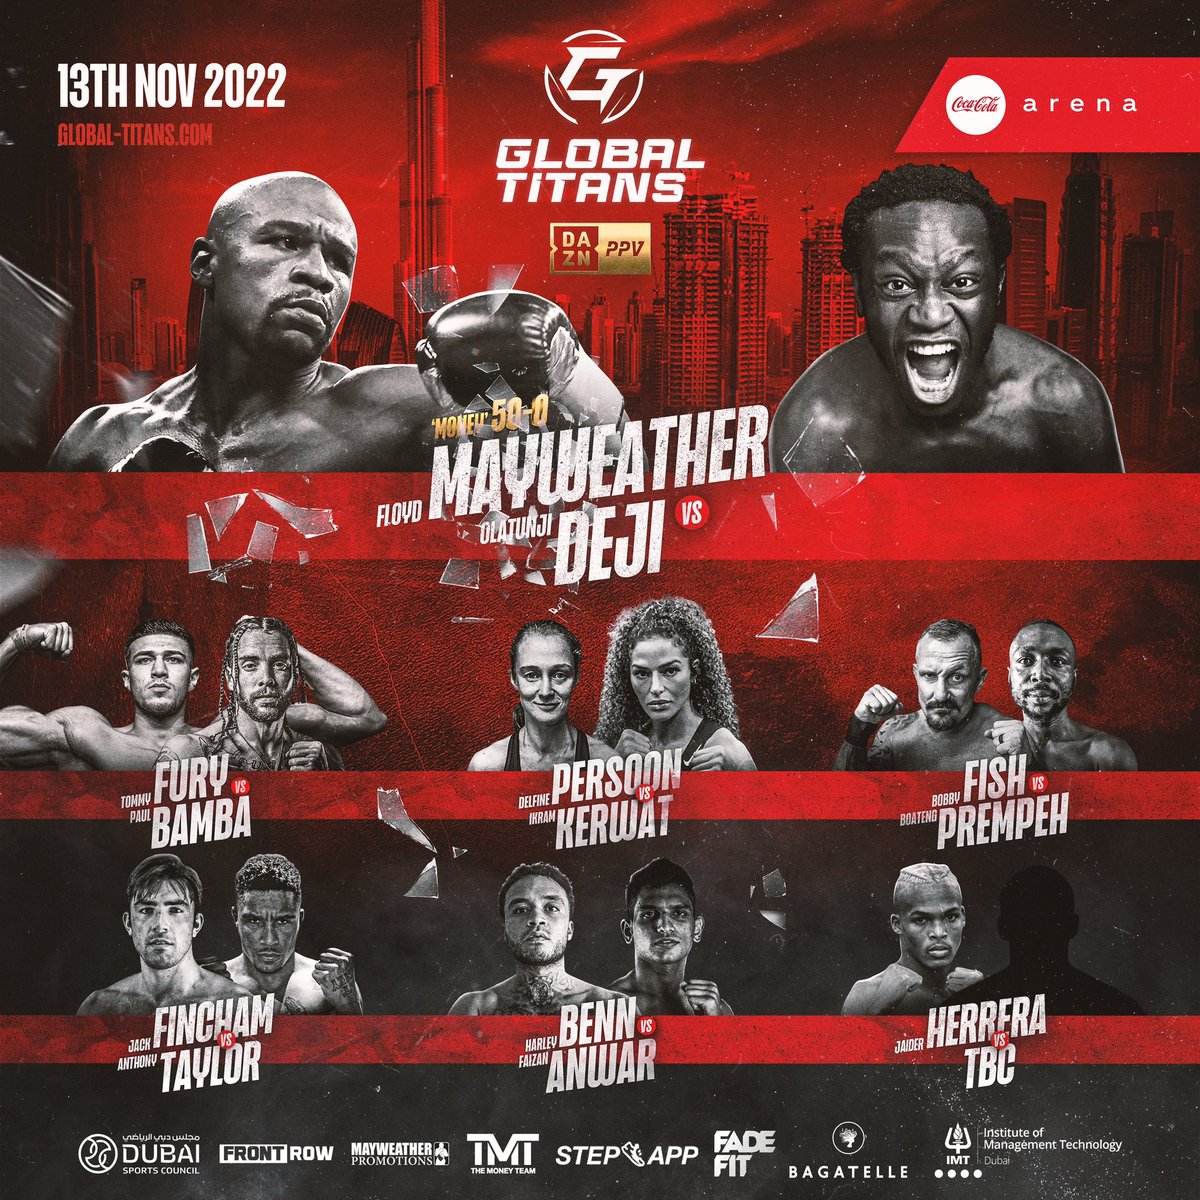 YOU DON’T WANT TO MISS THIS! 🔥 WIN 2 TICKETS to the #MayweatherDeji card at the Coca-Cola Arena in Dubai on Sunday November 13. To be in with a chance of winning: • Follow @OudayS & @GlobalTitansFS ✅ • RT this Tweet 🔄 • Tag Friends for a Bonus Entry 😎